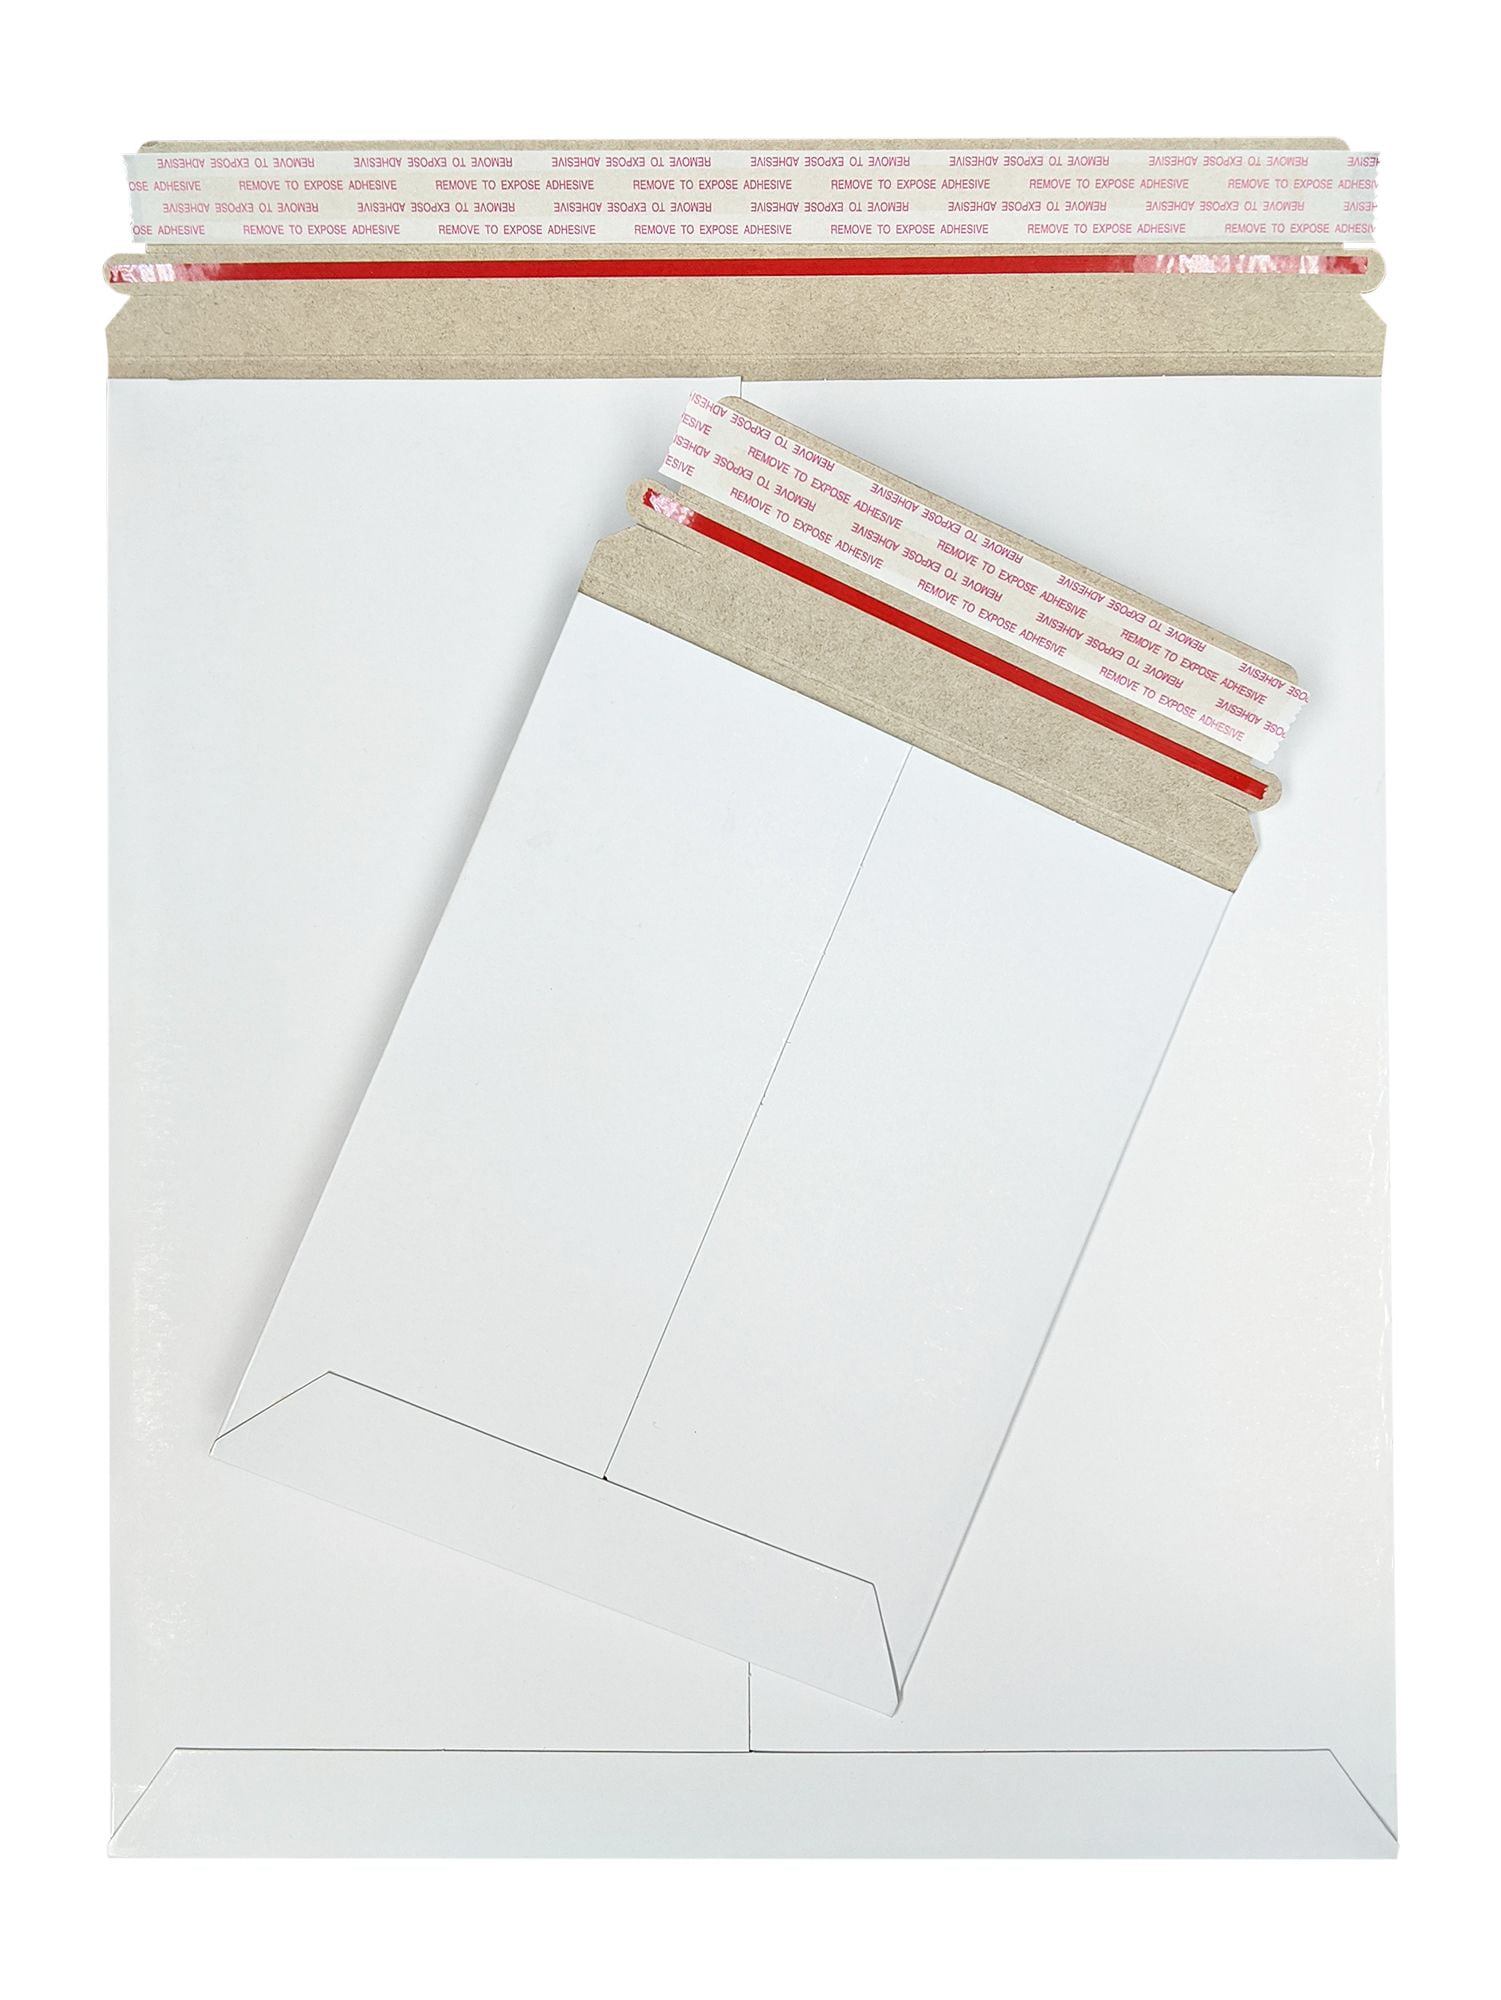 200 12.75X15 Rigid Photo Document PaperBoard Mailers Shipping Envelopes Recycled